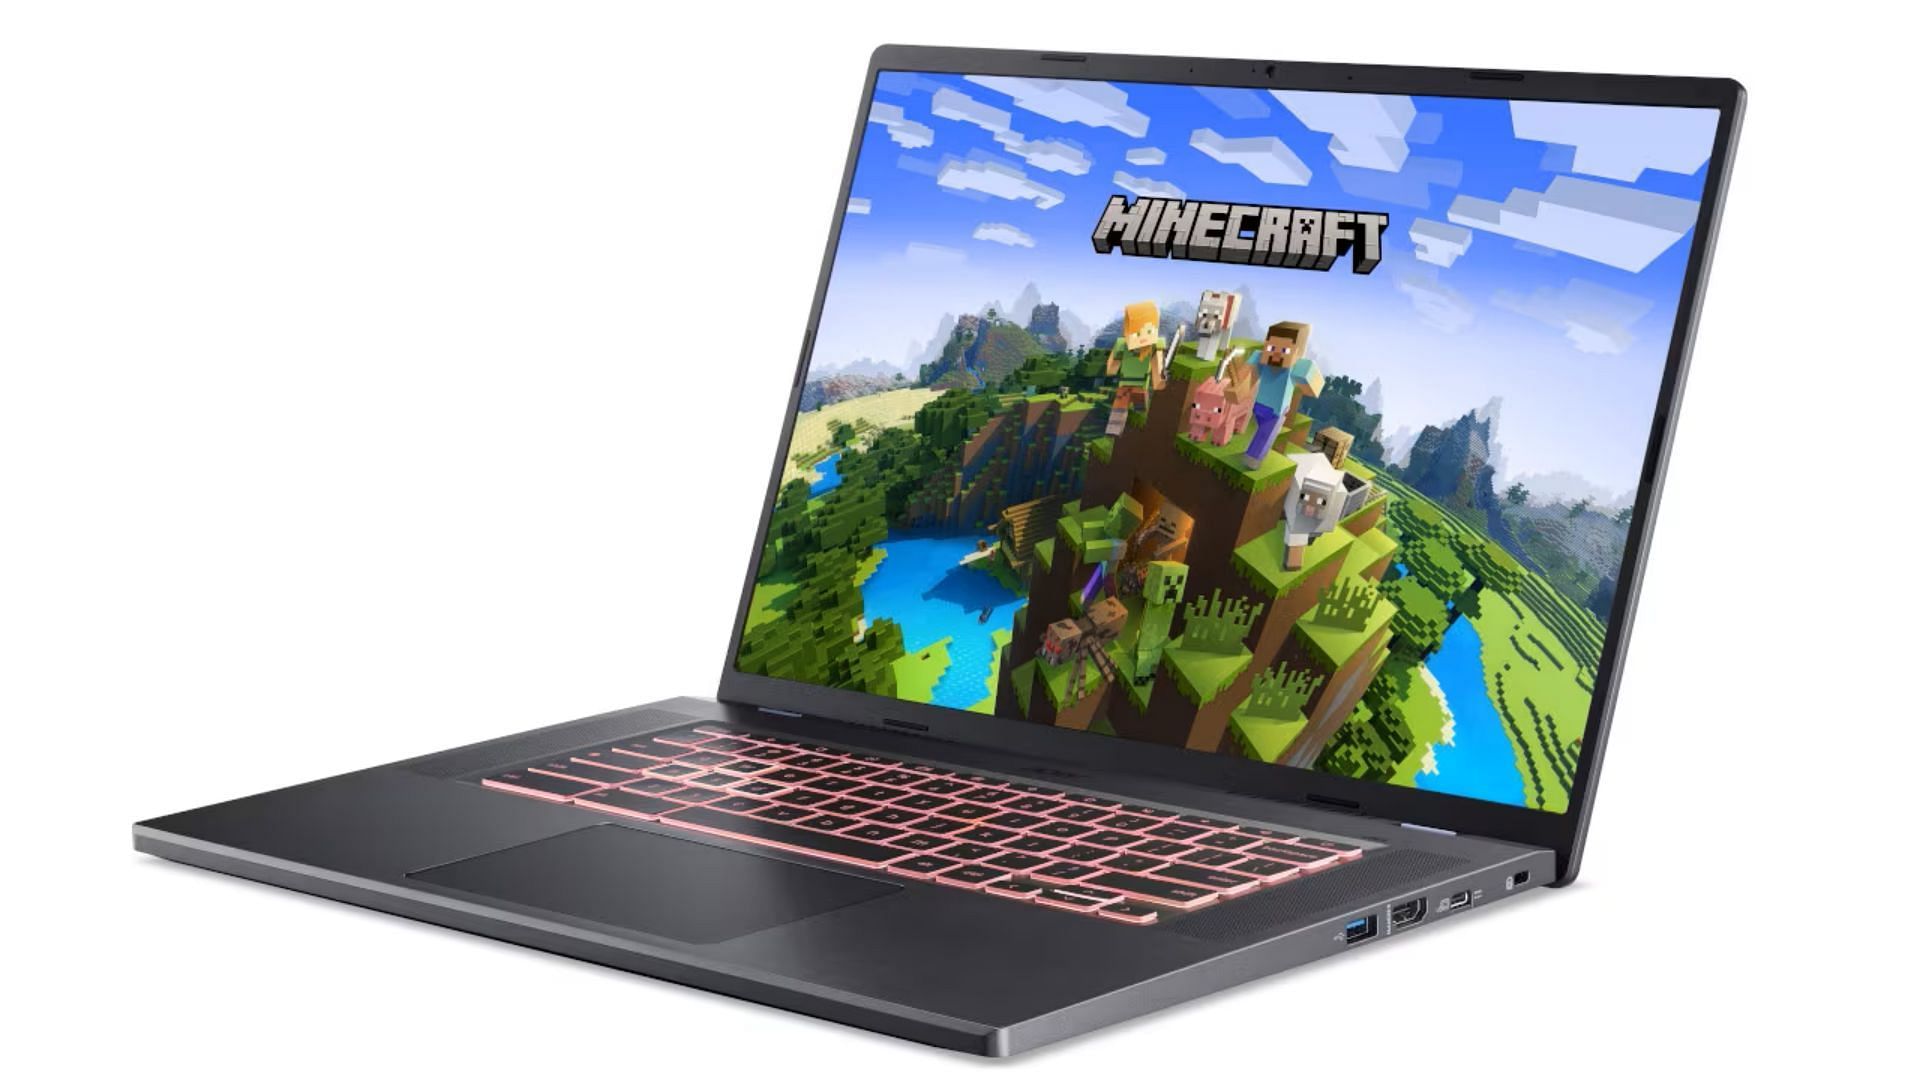 Thousands of new players will be jumping into Minecraft after it releases on Chromebooks (Image via Mojang)